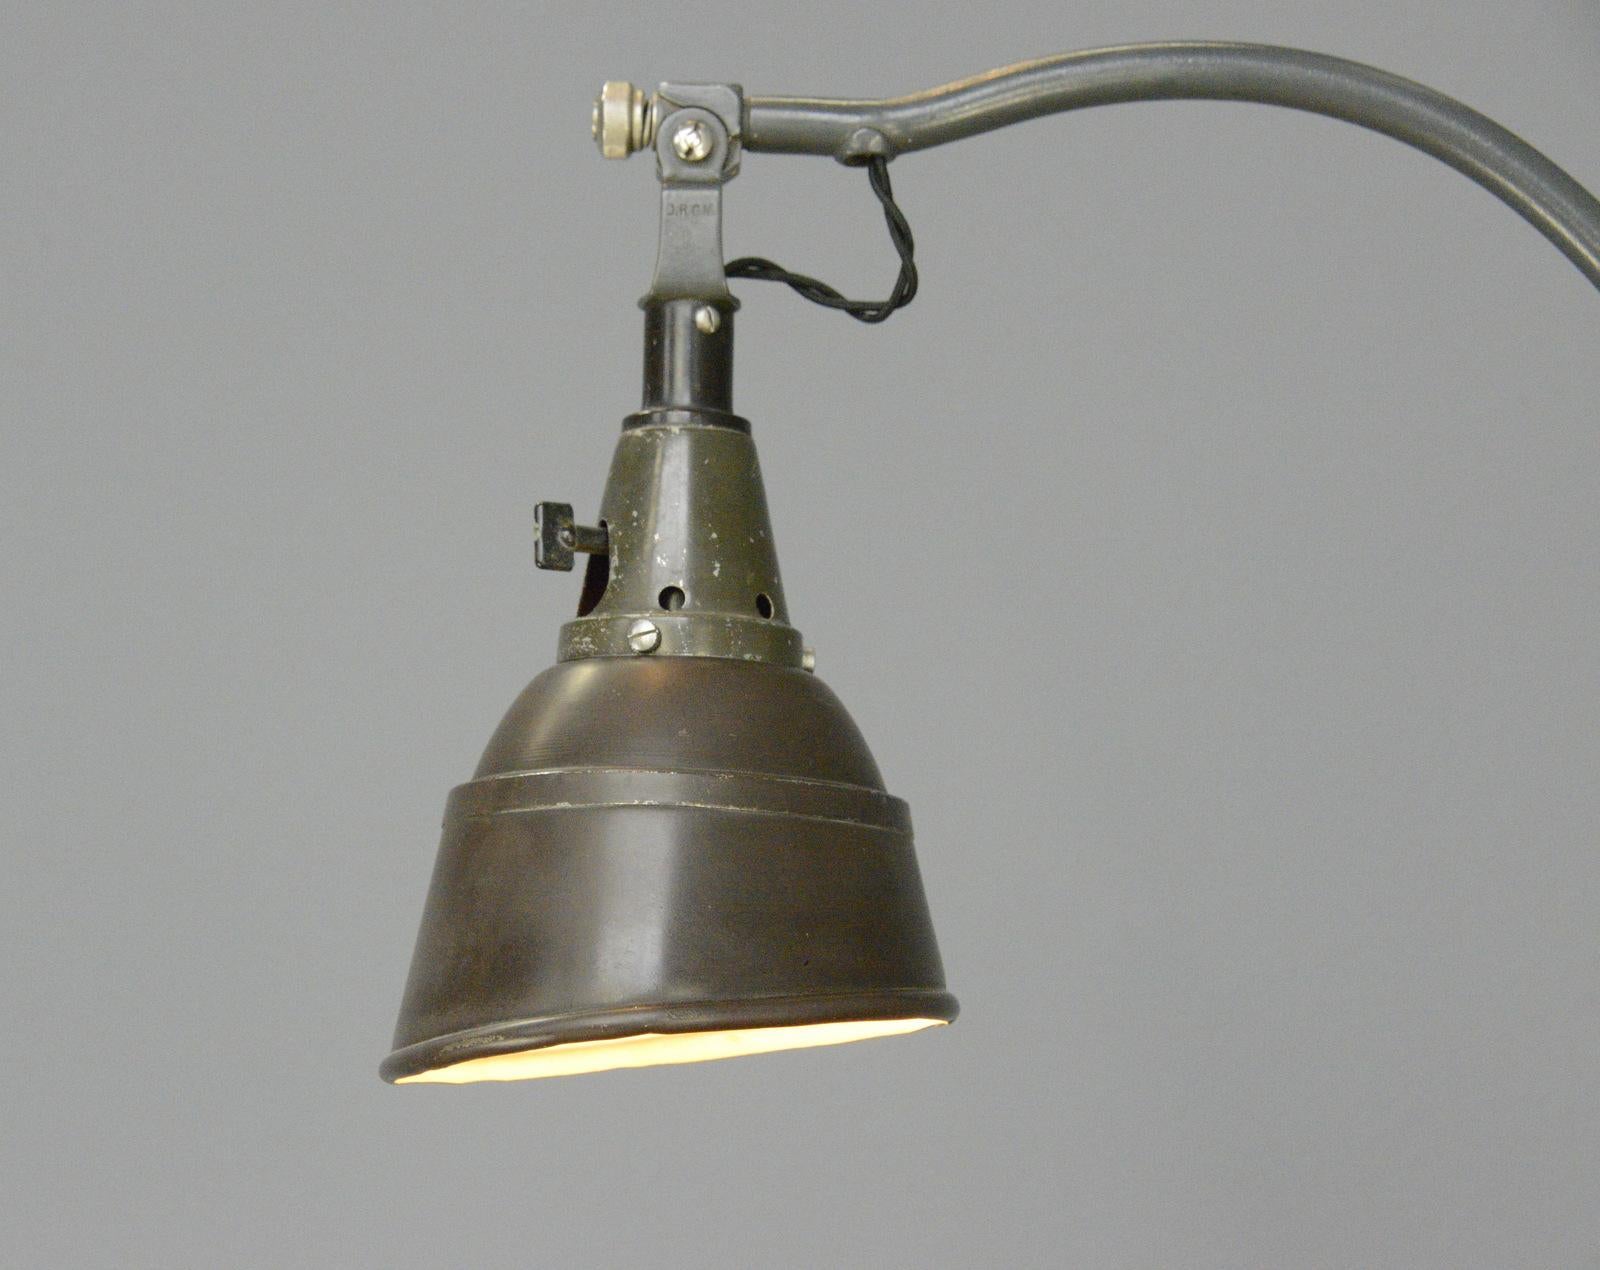 Typ 113 Peitsche Table Lamp by Curt Fischer for Midgard circa 1940s For Sale 1